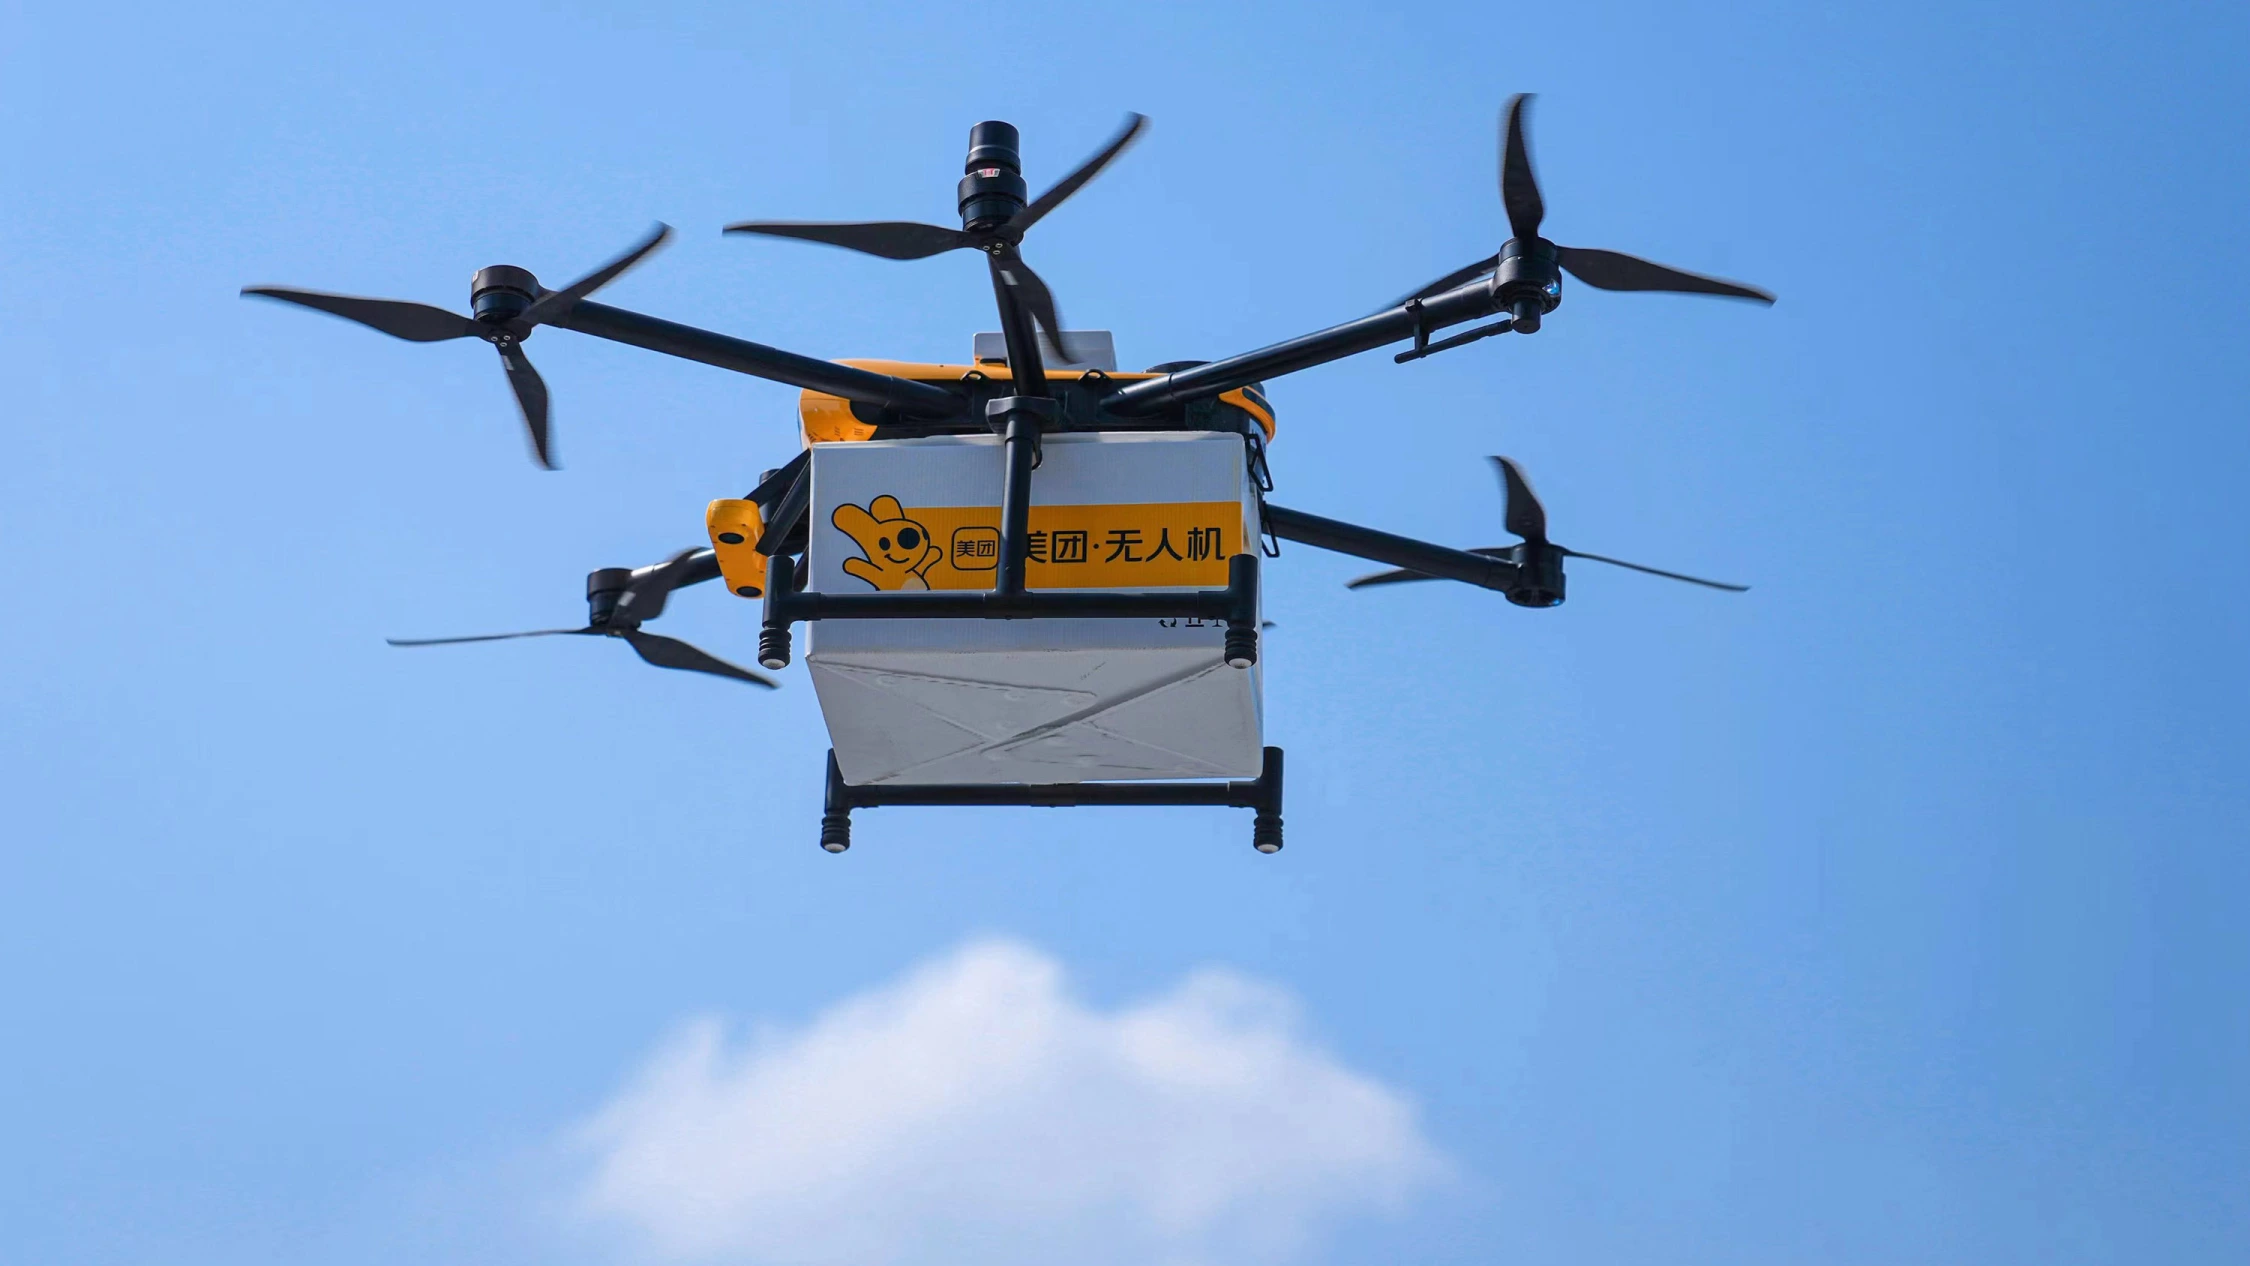 Food Delivery by Drone Is Just Part of Daily Life in Shenzhen